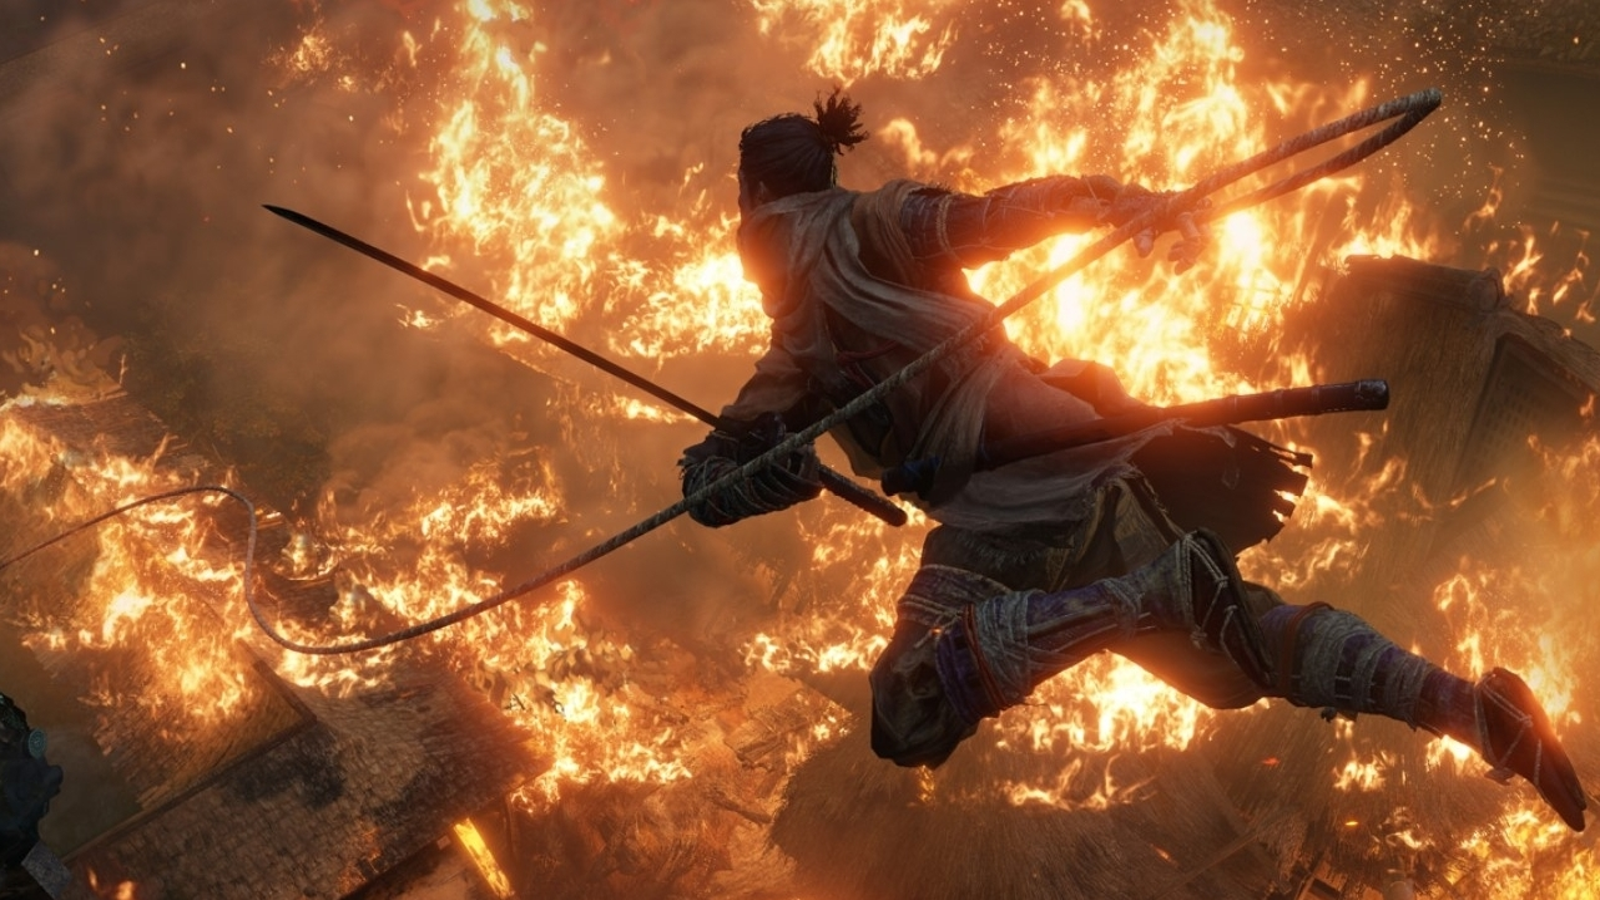 Digitalfoundry 2019 Sekiro Shadows Die Twice Pc Performance Analysis 1553524065875 ?width=1600&height=900&fit=crop&quality=100&format=png&enable=upscale&auto=webp